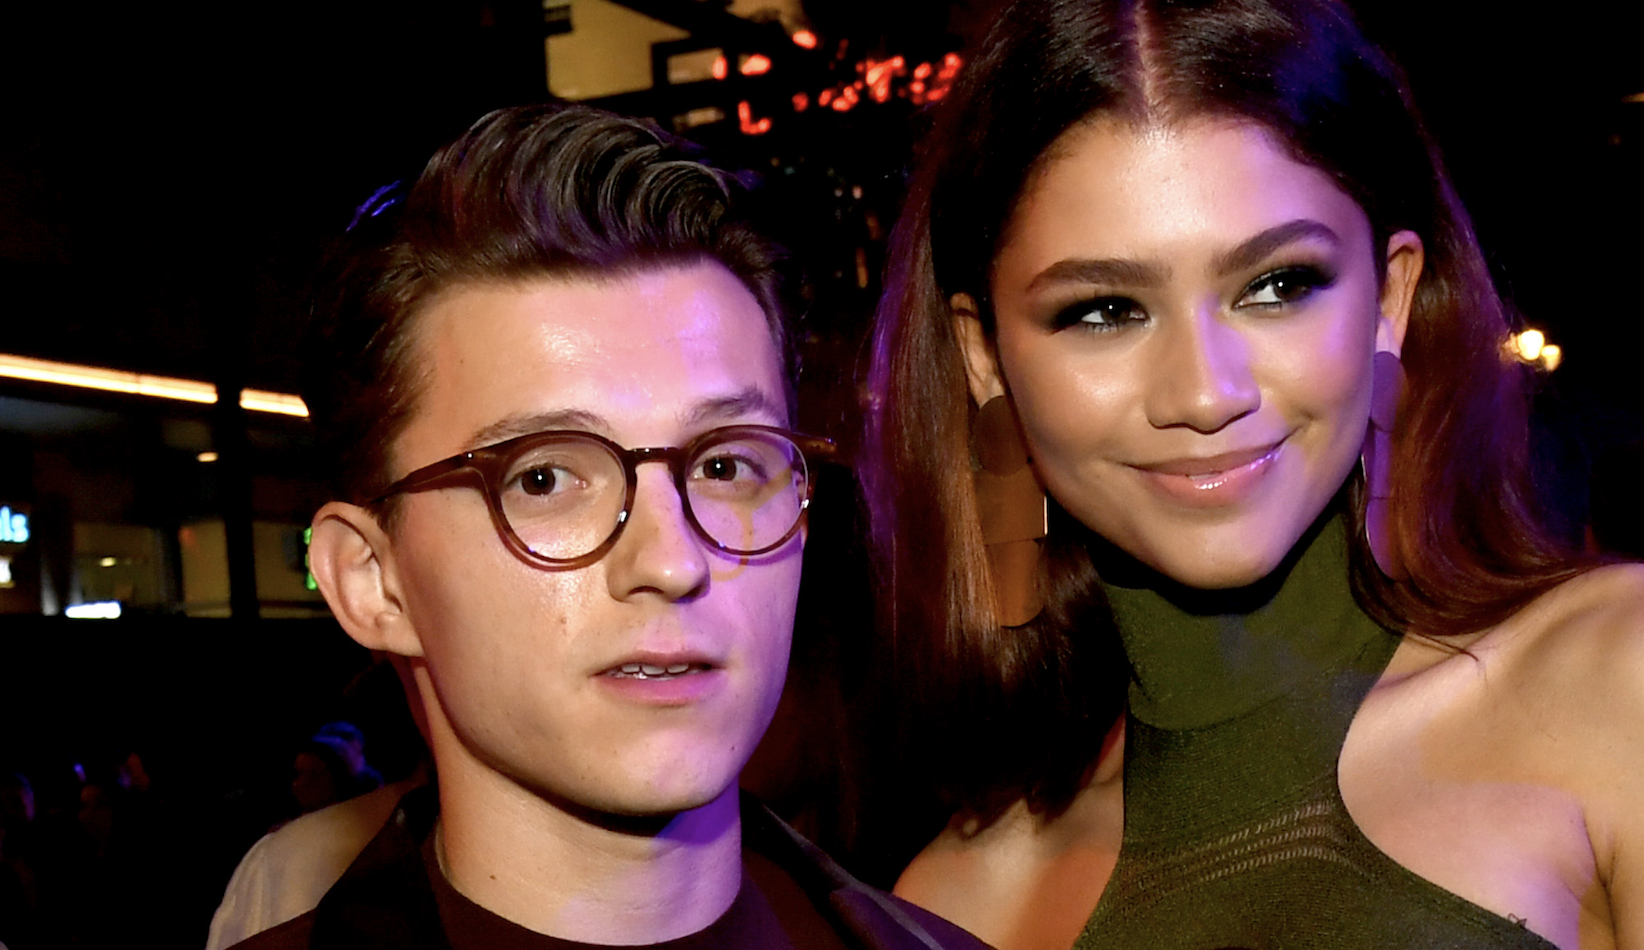 Tom Holland Says He And Zendaya Felt ‘Robbed Of Privacy’ After One Romantic Moment Went Viral